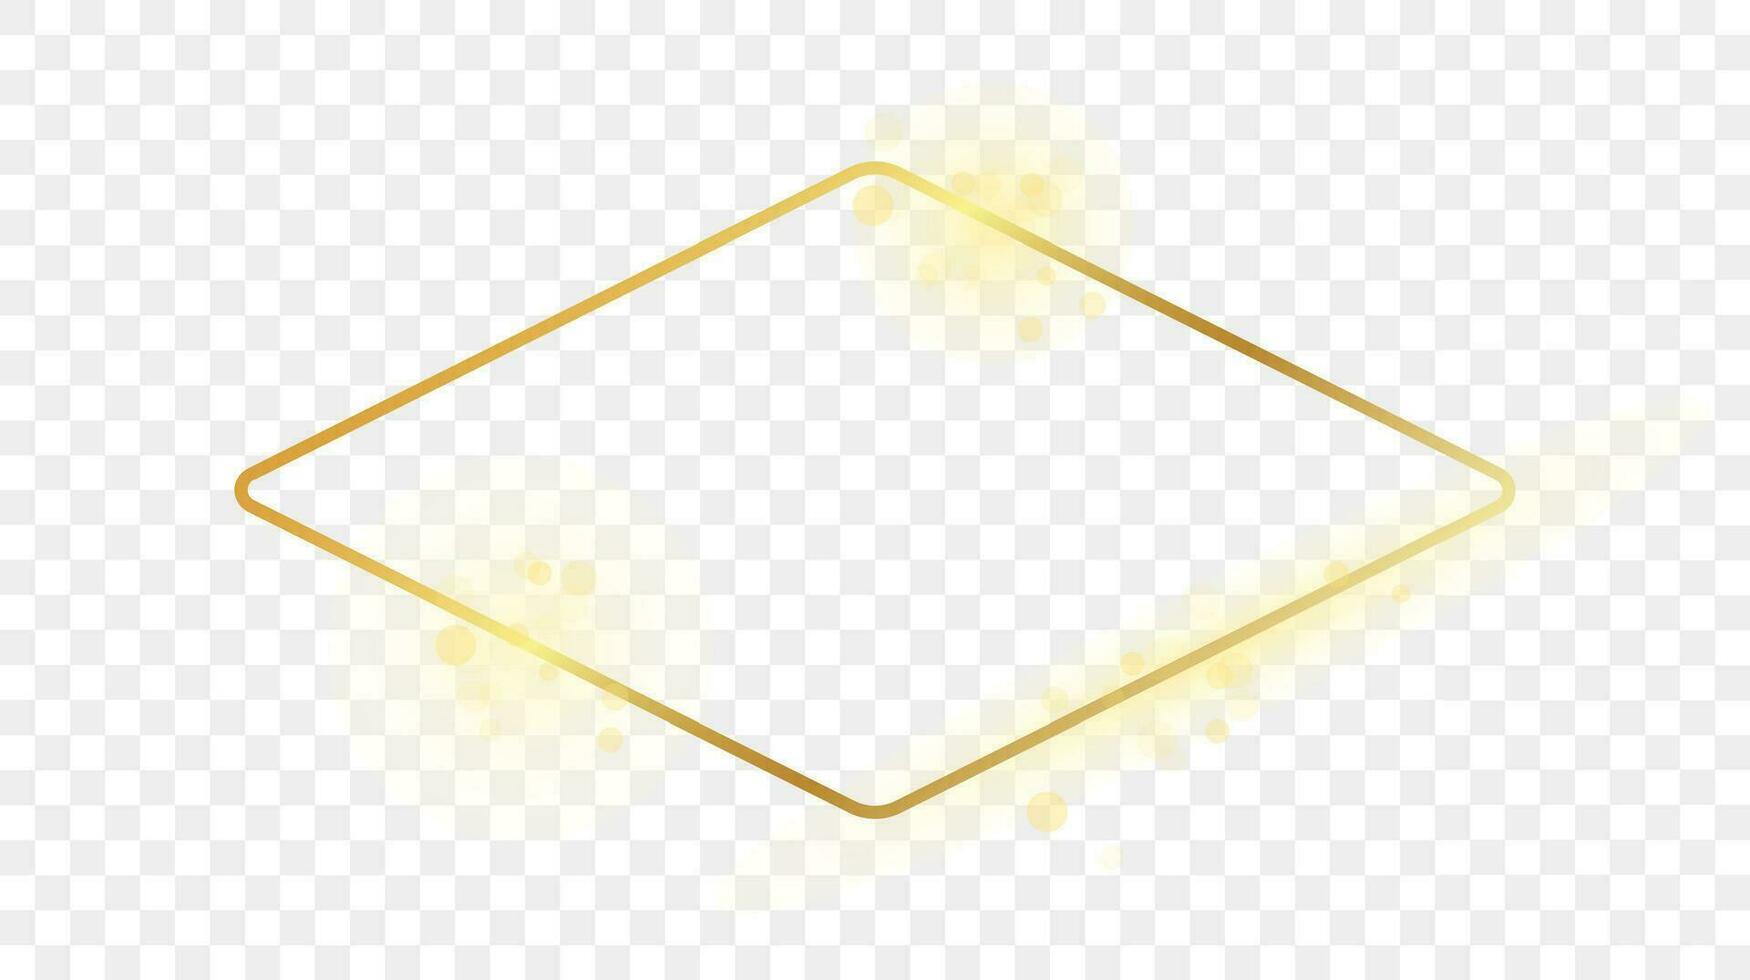 Gold glowing rounded rhombus shape frame vector